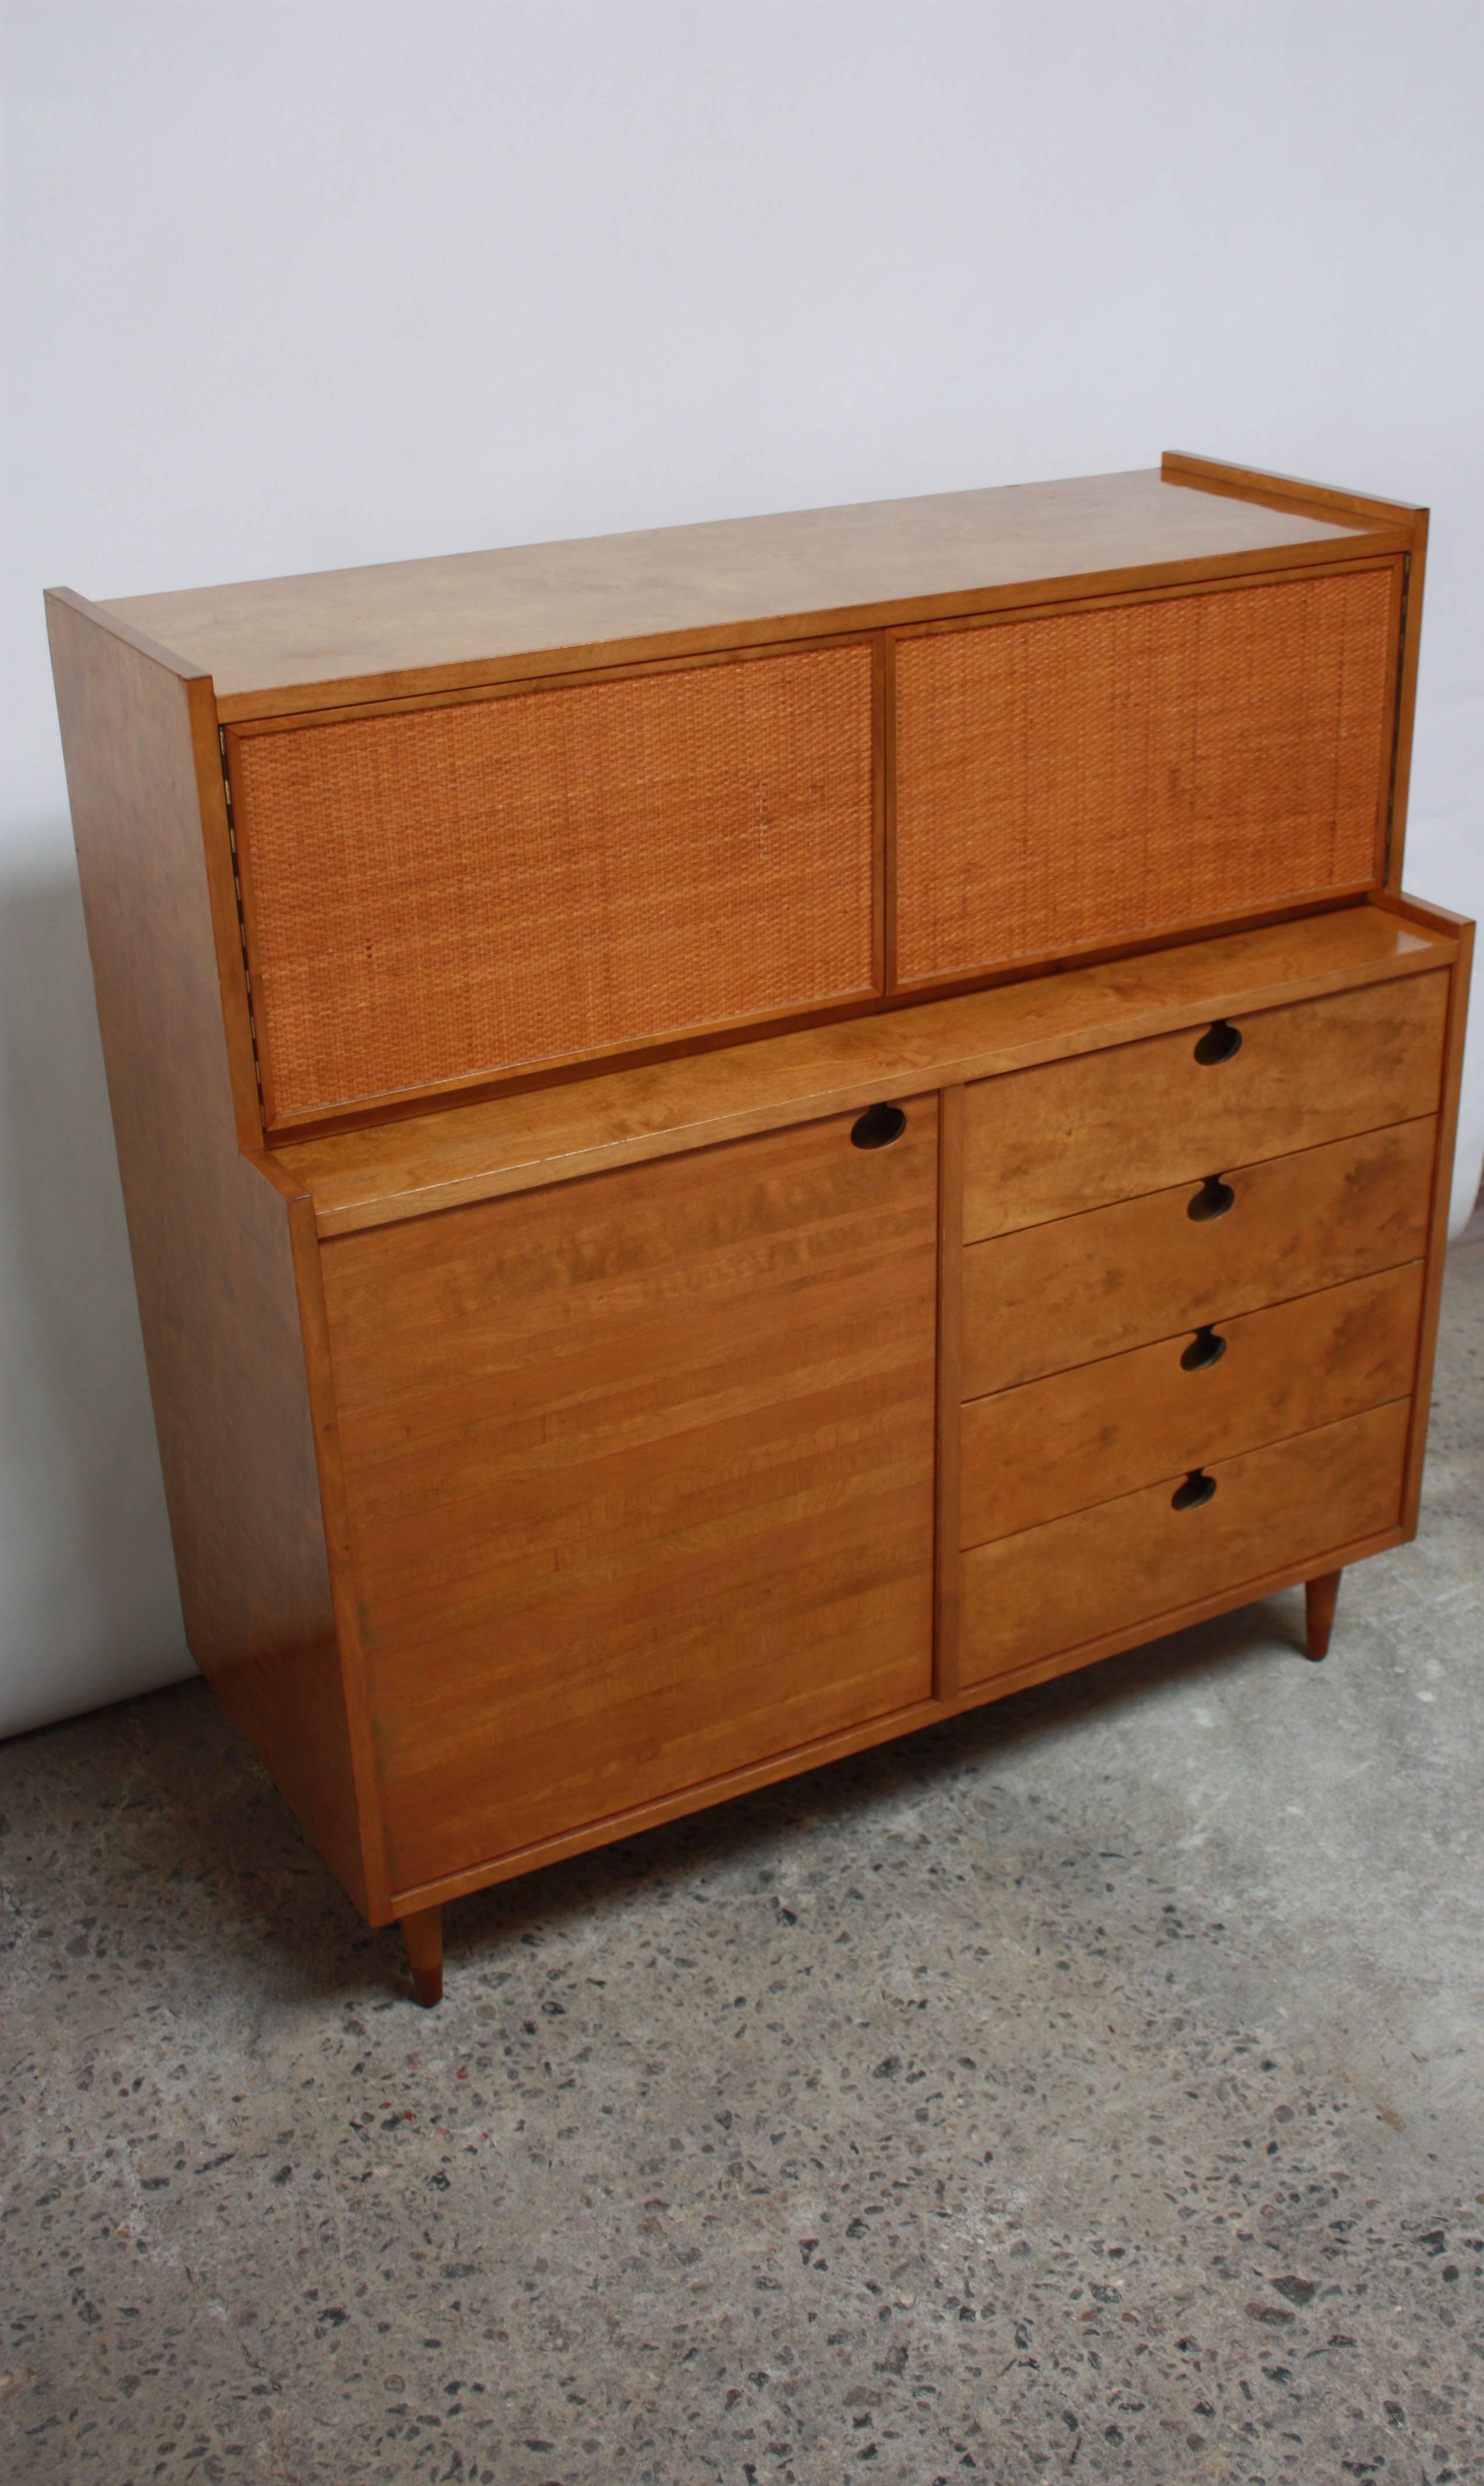 Swedish Edmond J. Spence Cabinet in Maple and Cane